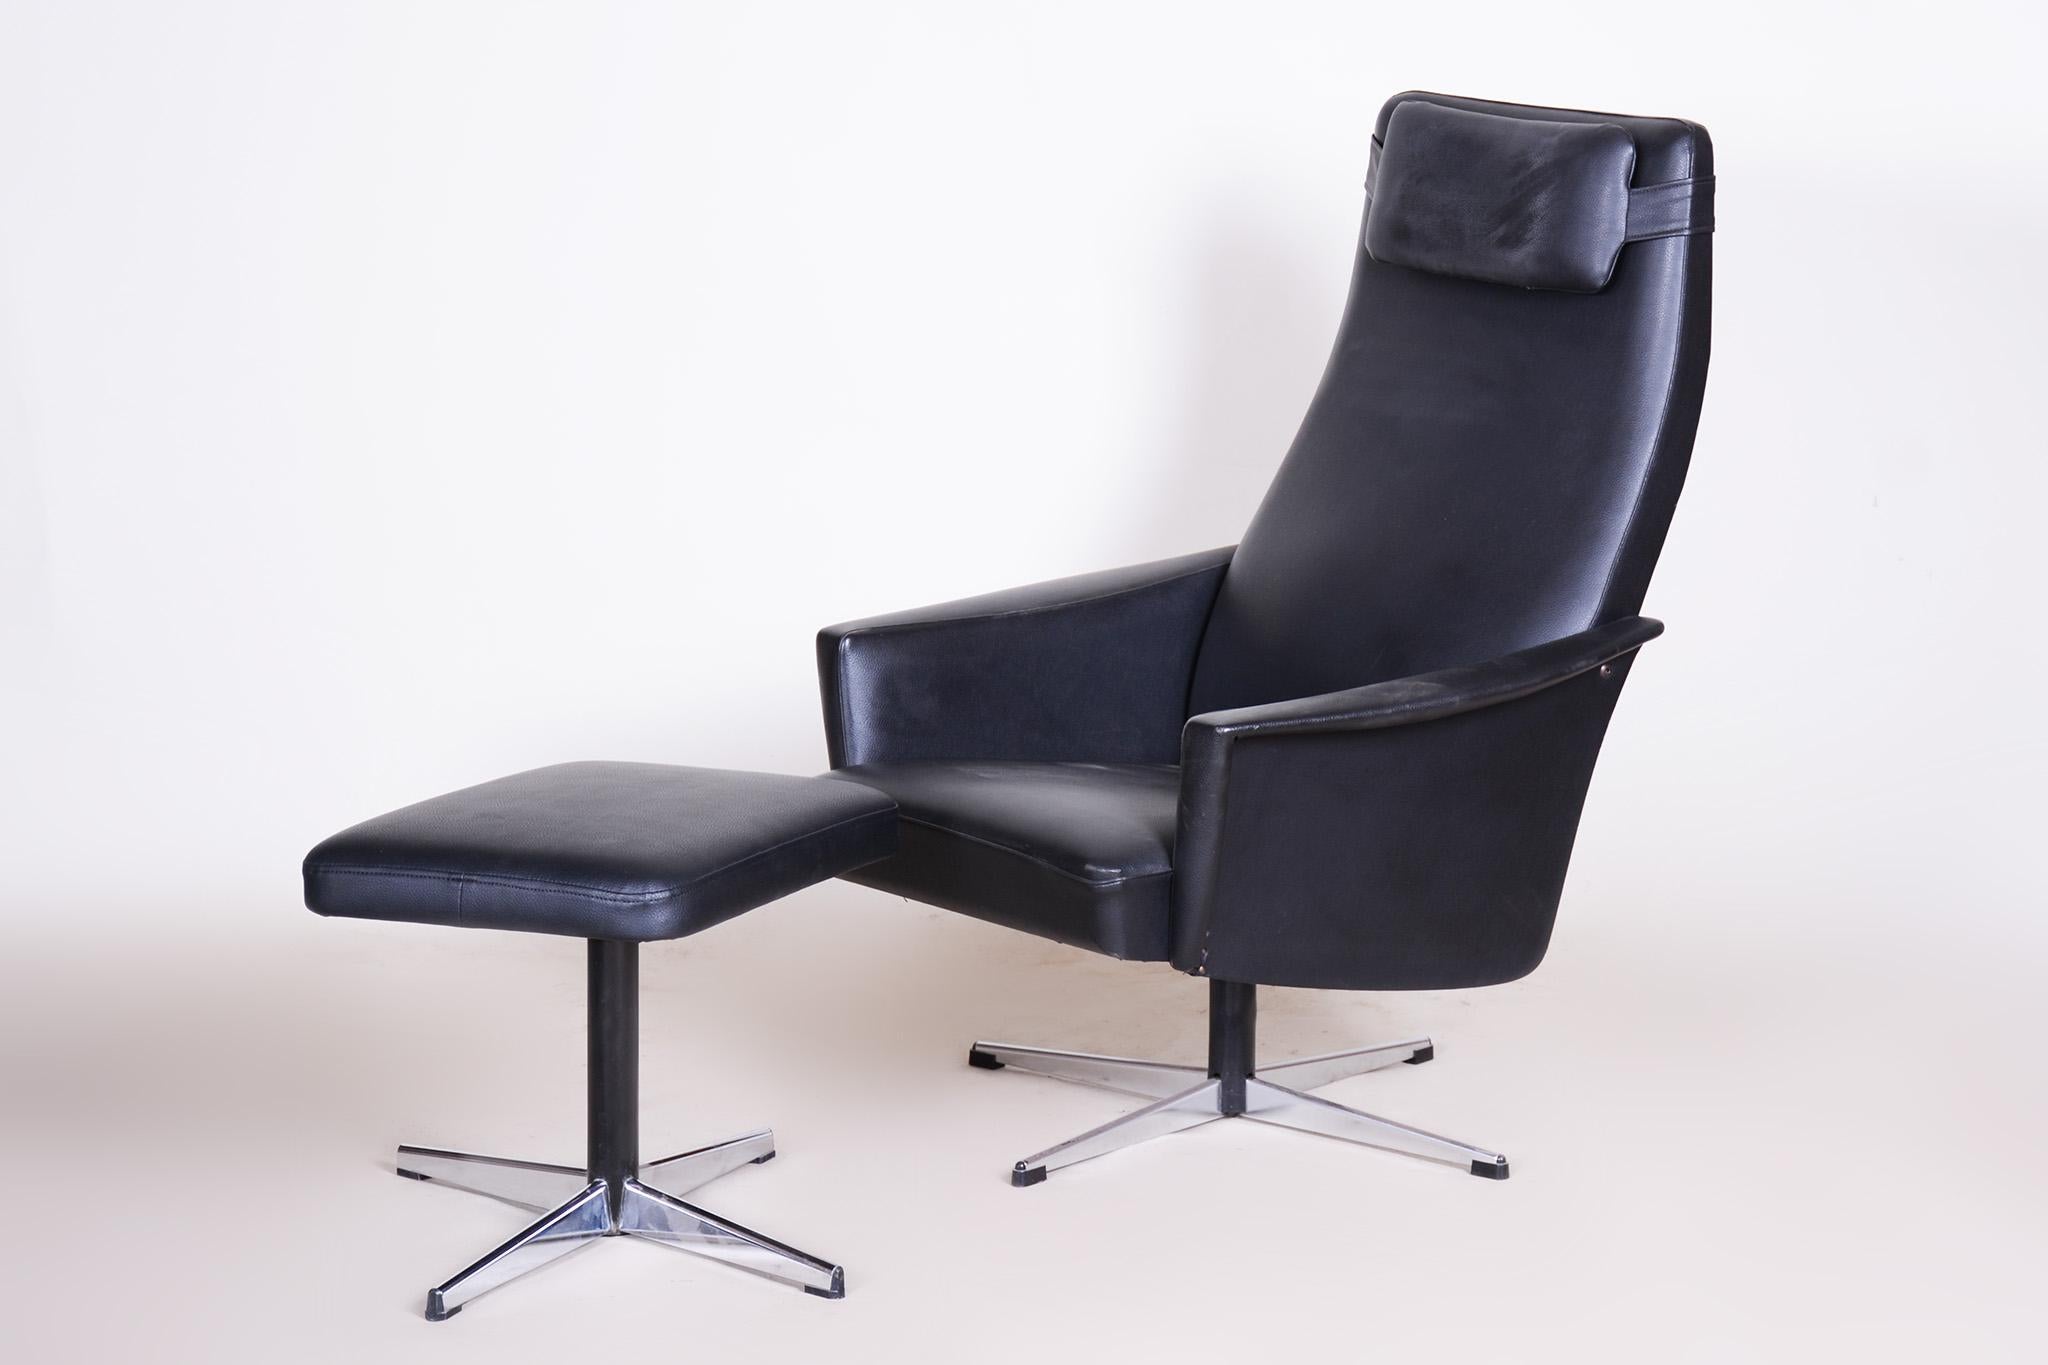 Vegan Leather Bauhaus Swivel Chair with Foot Stool, Made in 1960s Czechia For Sale 1